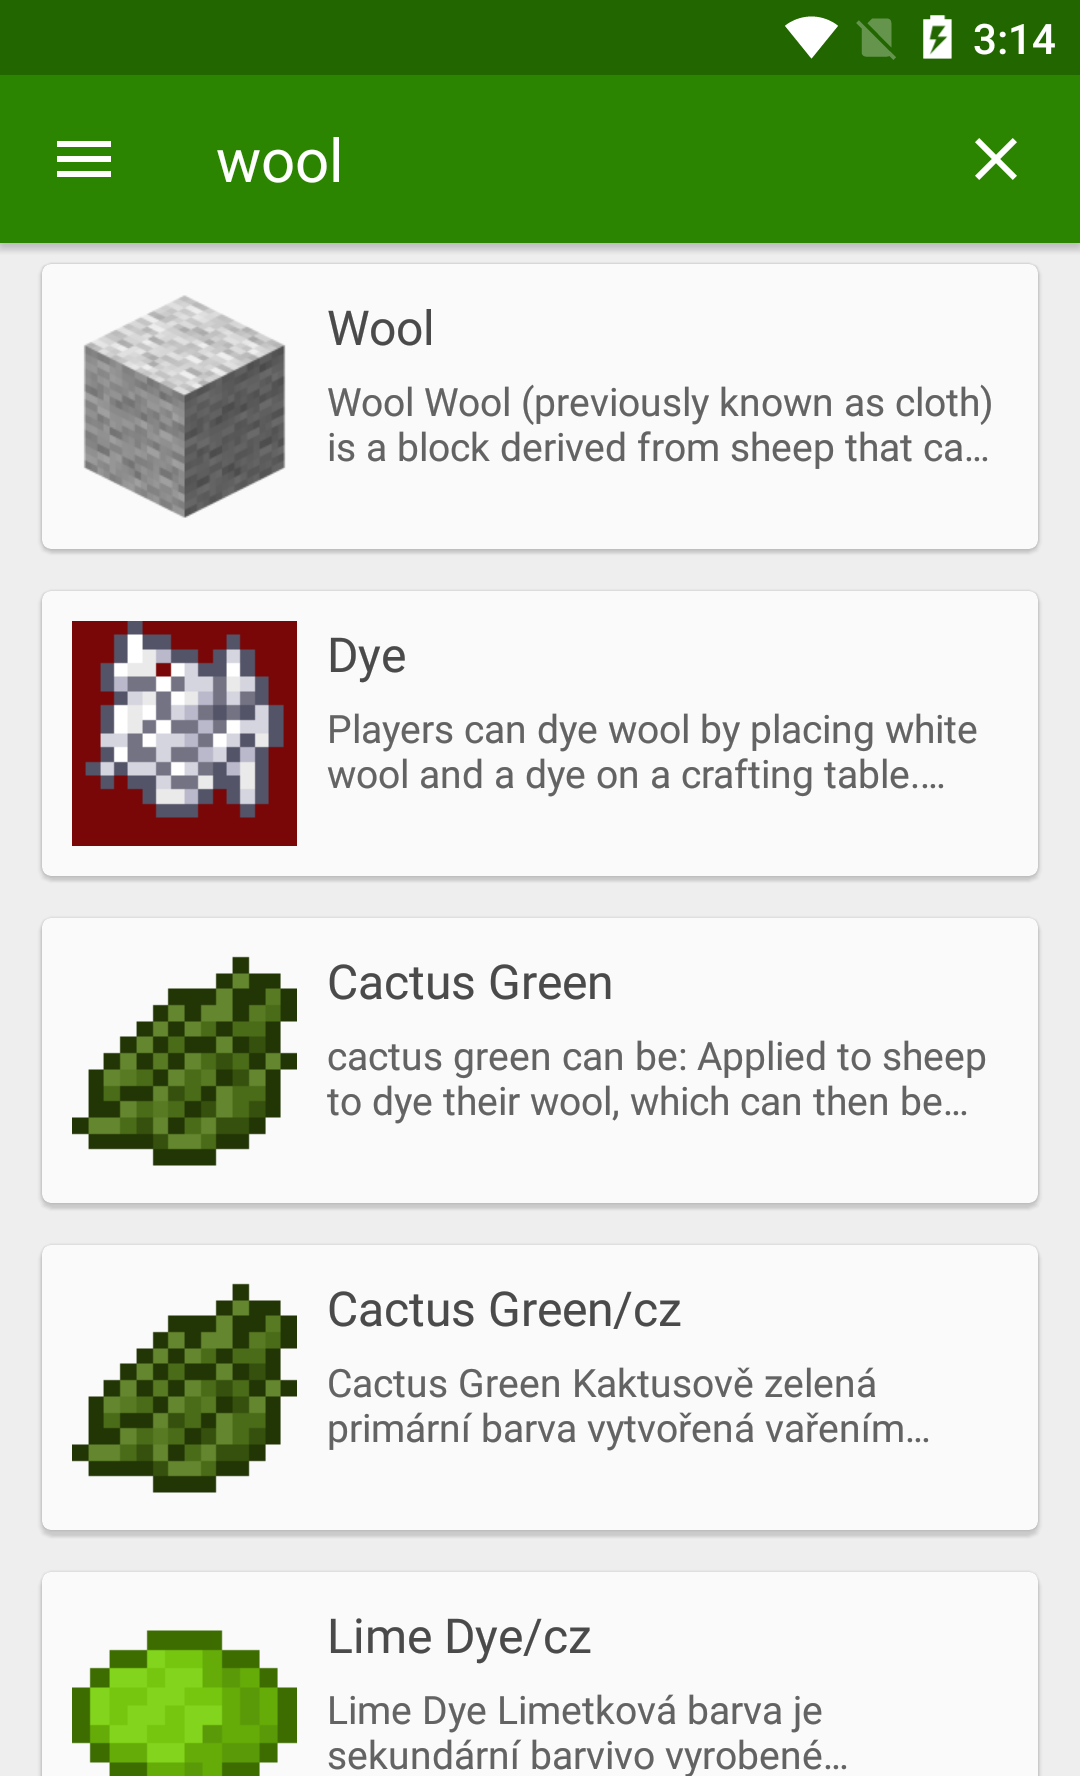 Wiki for Minecraft for Android - APK Download - 